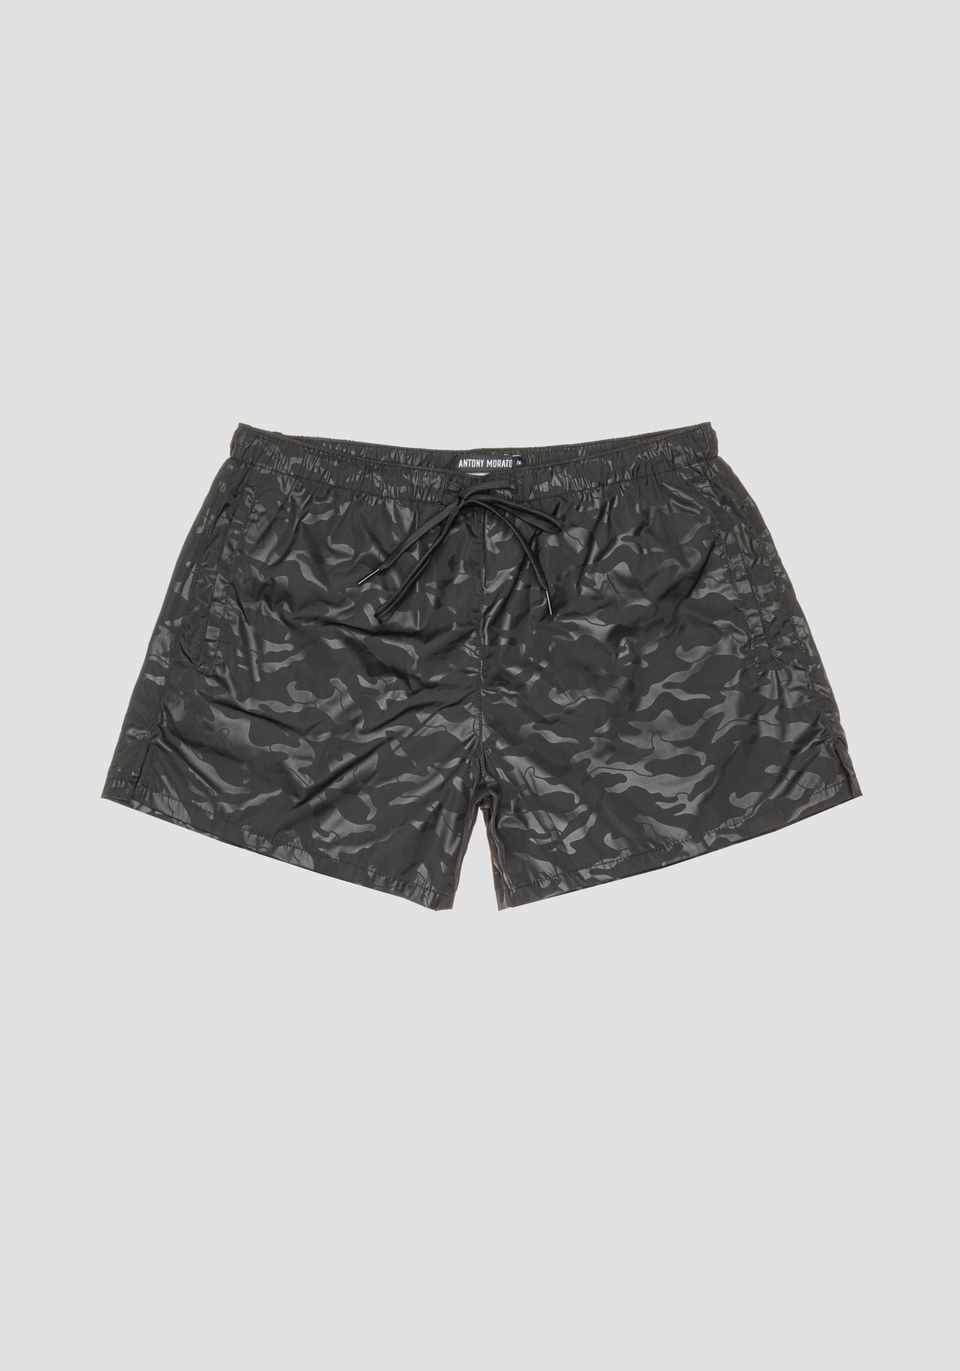 SLIM-FIT SWIMMING TRUNKS WITH TONE-ON-TONE CAMOUFLAGE PRINT - Antony Morato Online Shop